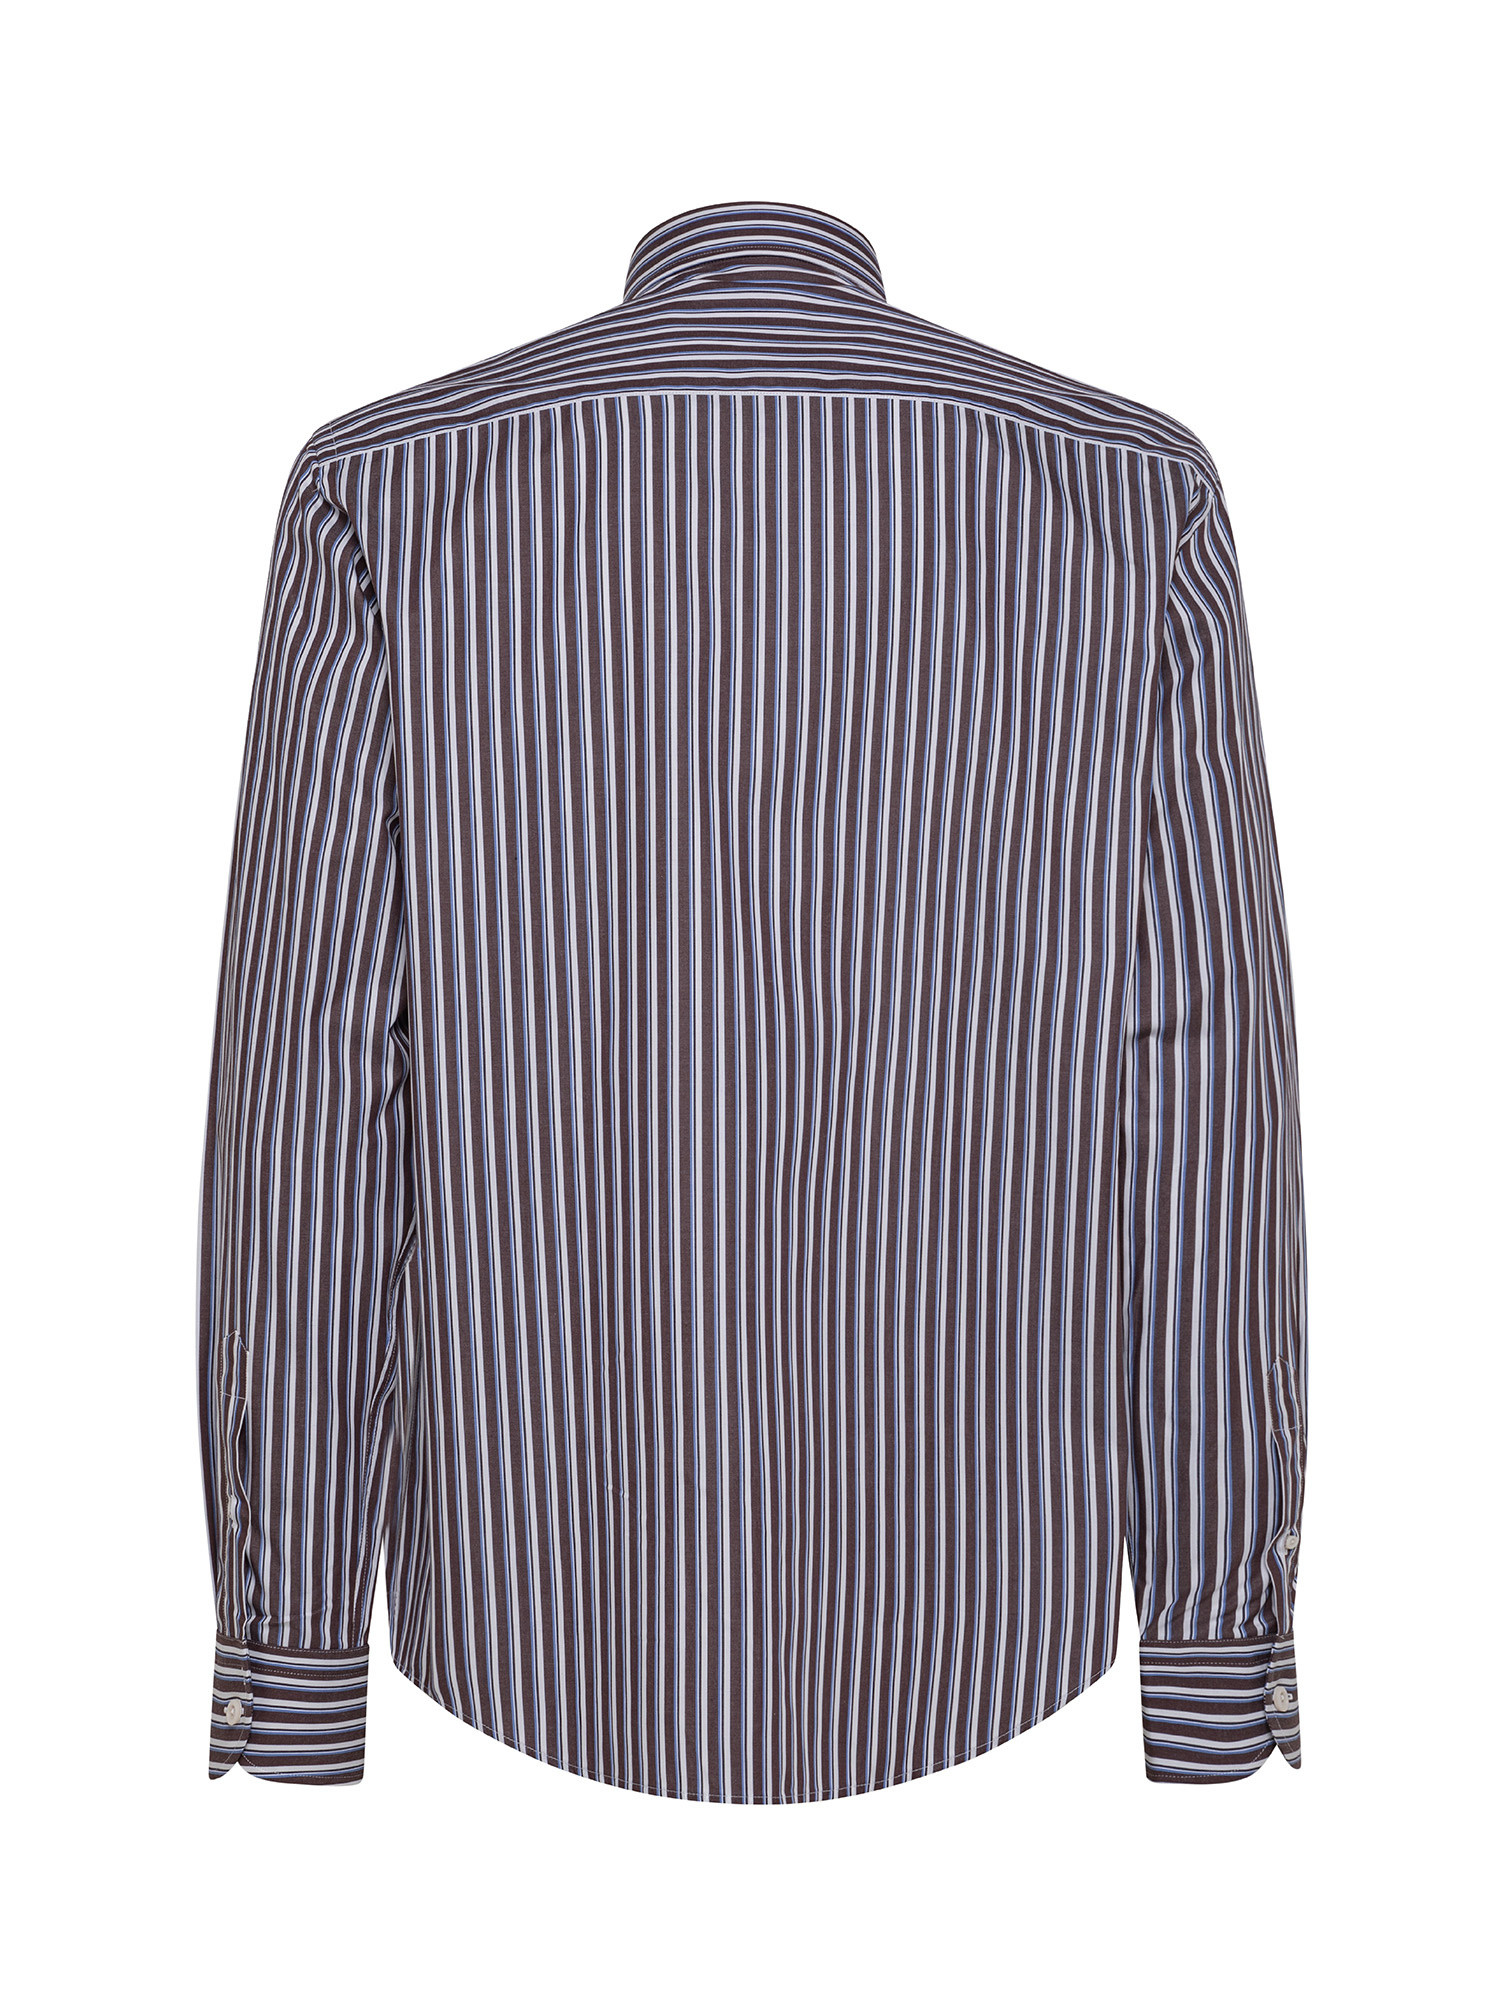 Luca D'Altieri - Tailor fit striped shirt in pure cotton, Brown, large image number 2